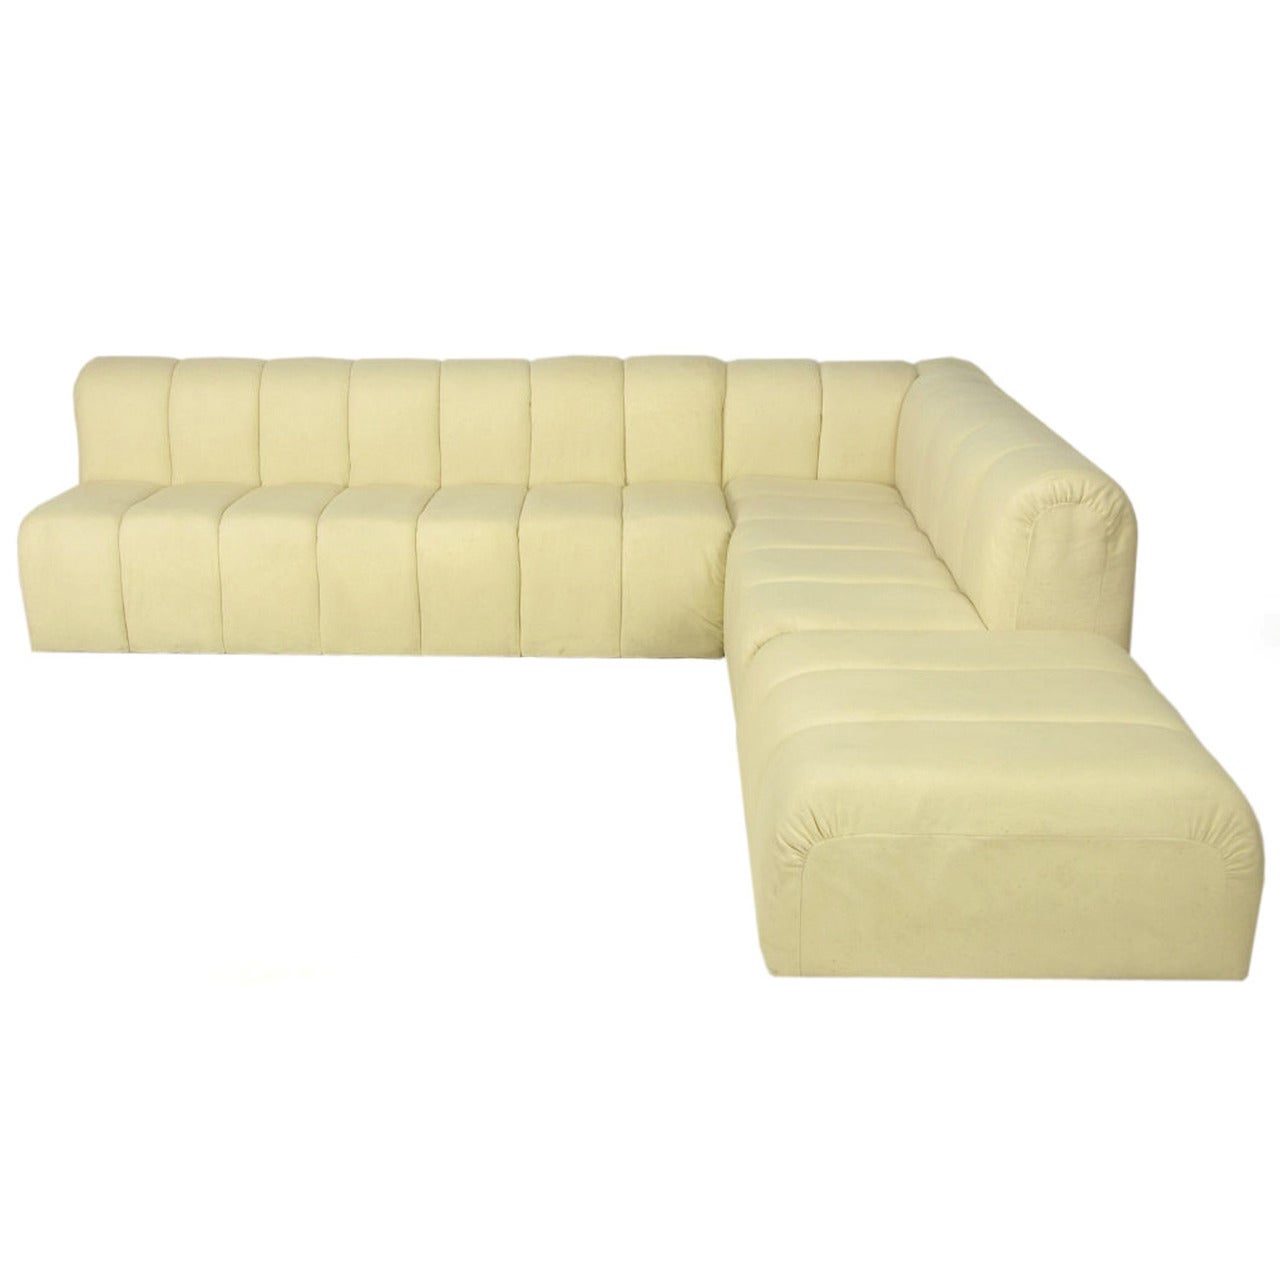 Substantial Three-Piece Channeled Ivory Wool Sectional